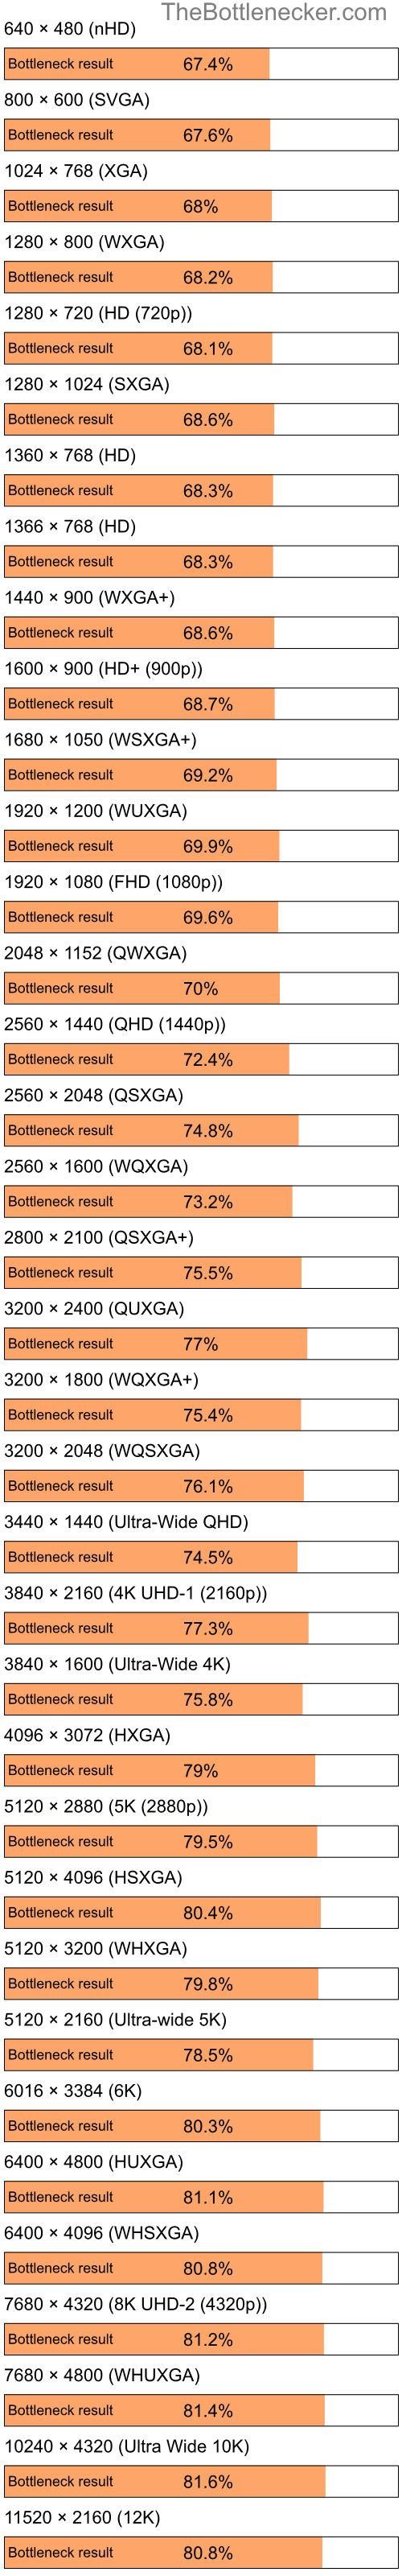 Bottleneck results by resolution for Intel Atom N270 and AMD Mobility Radeon 4100 in7 Days to Die